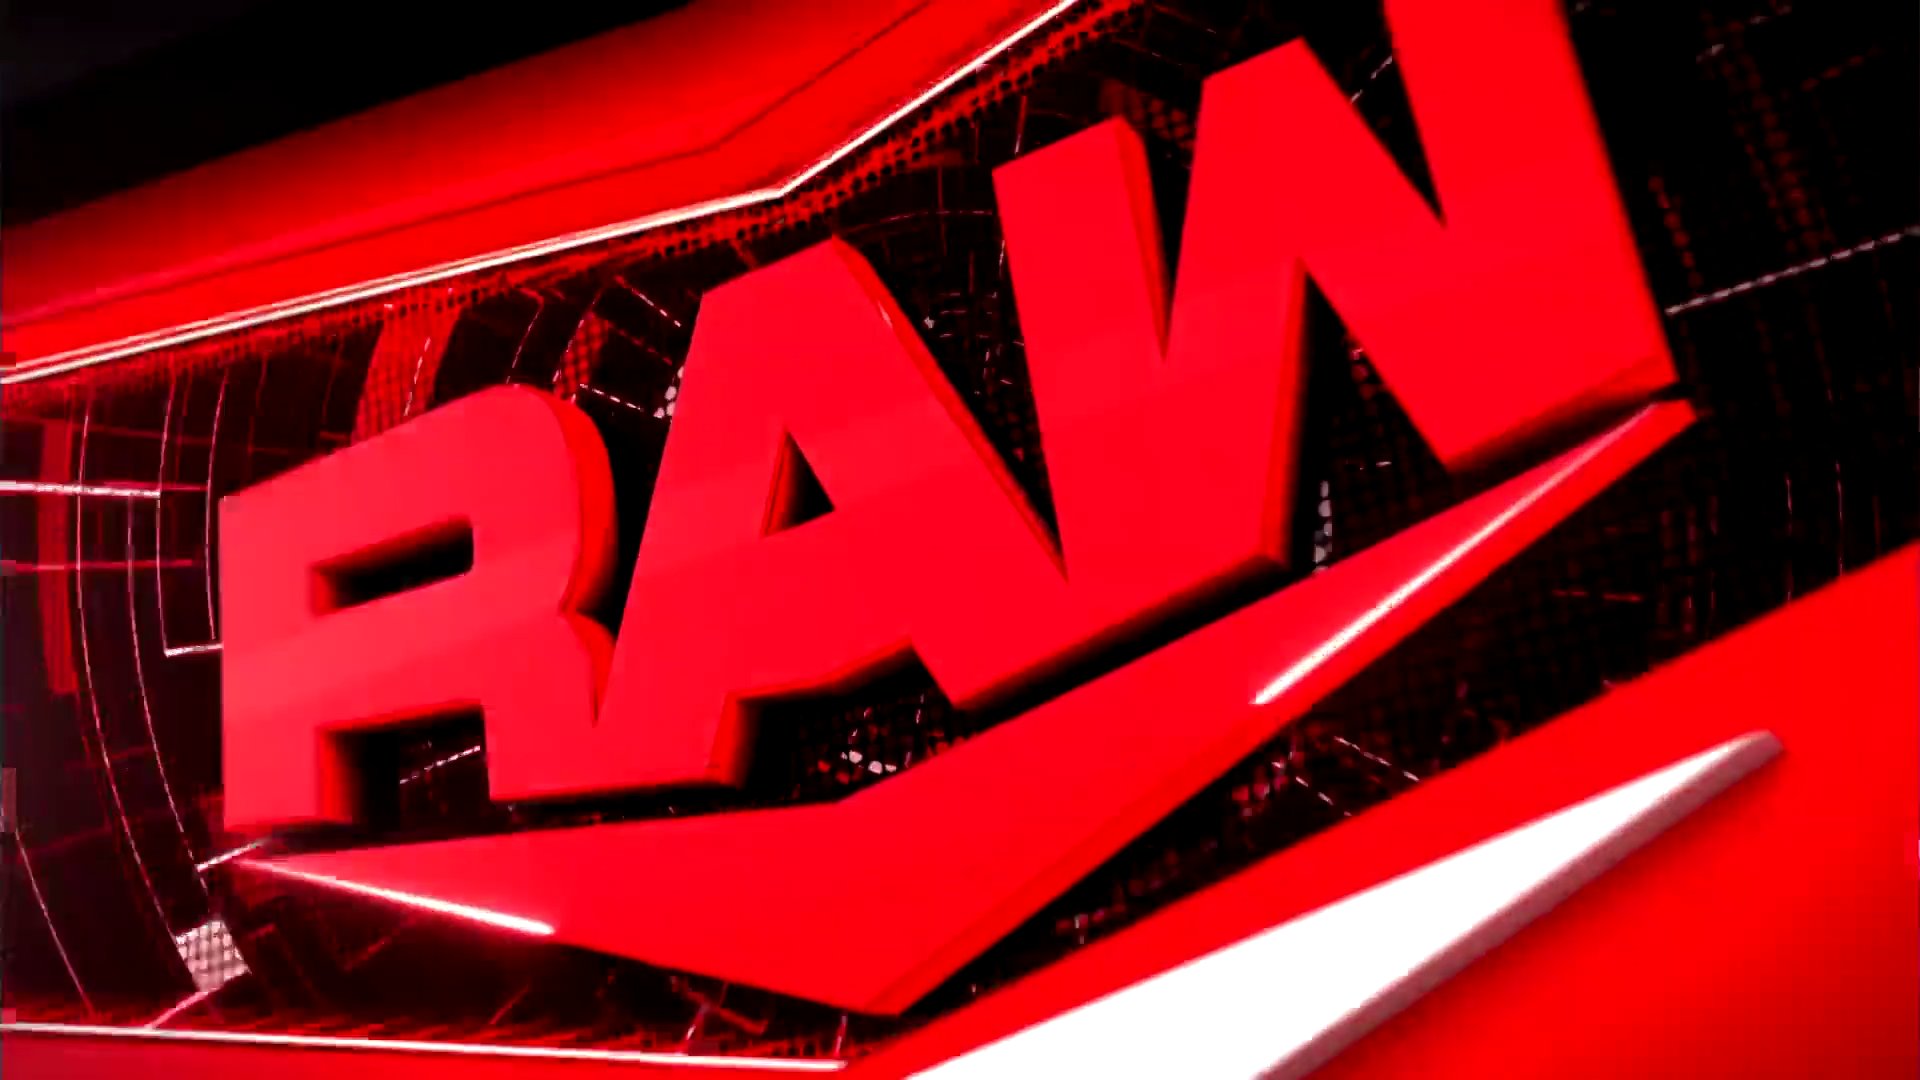 Possible Major Spoiler For Tonight's WWE RAW Inc